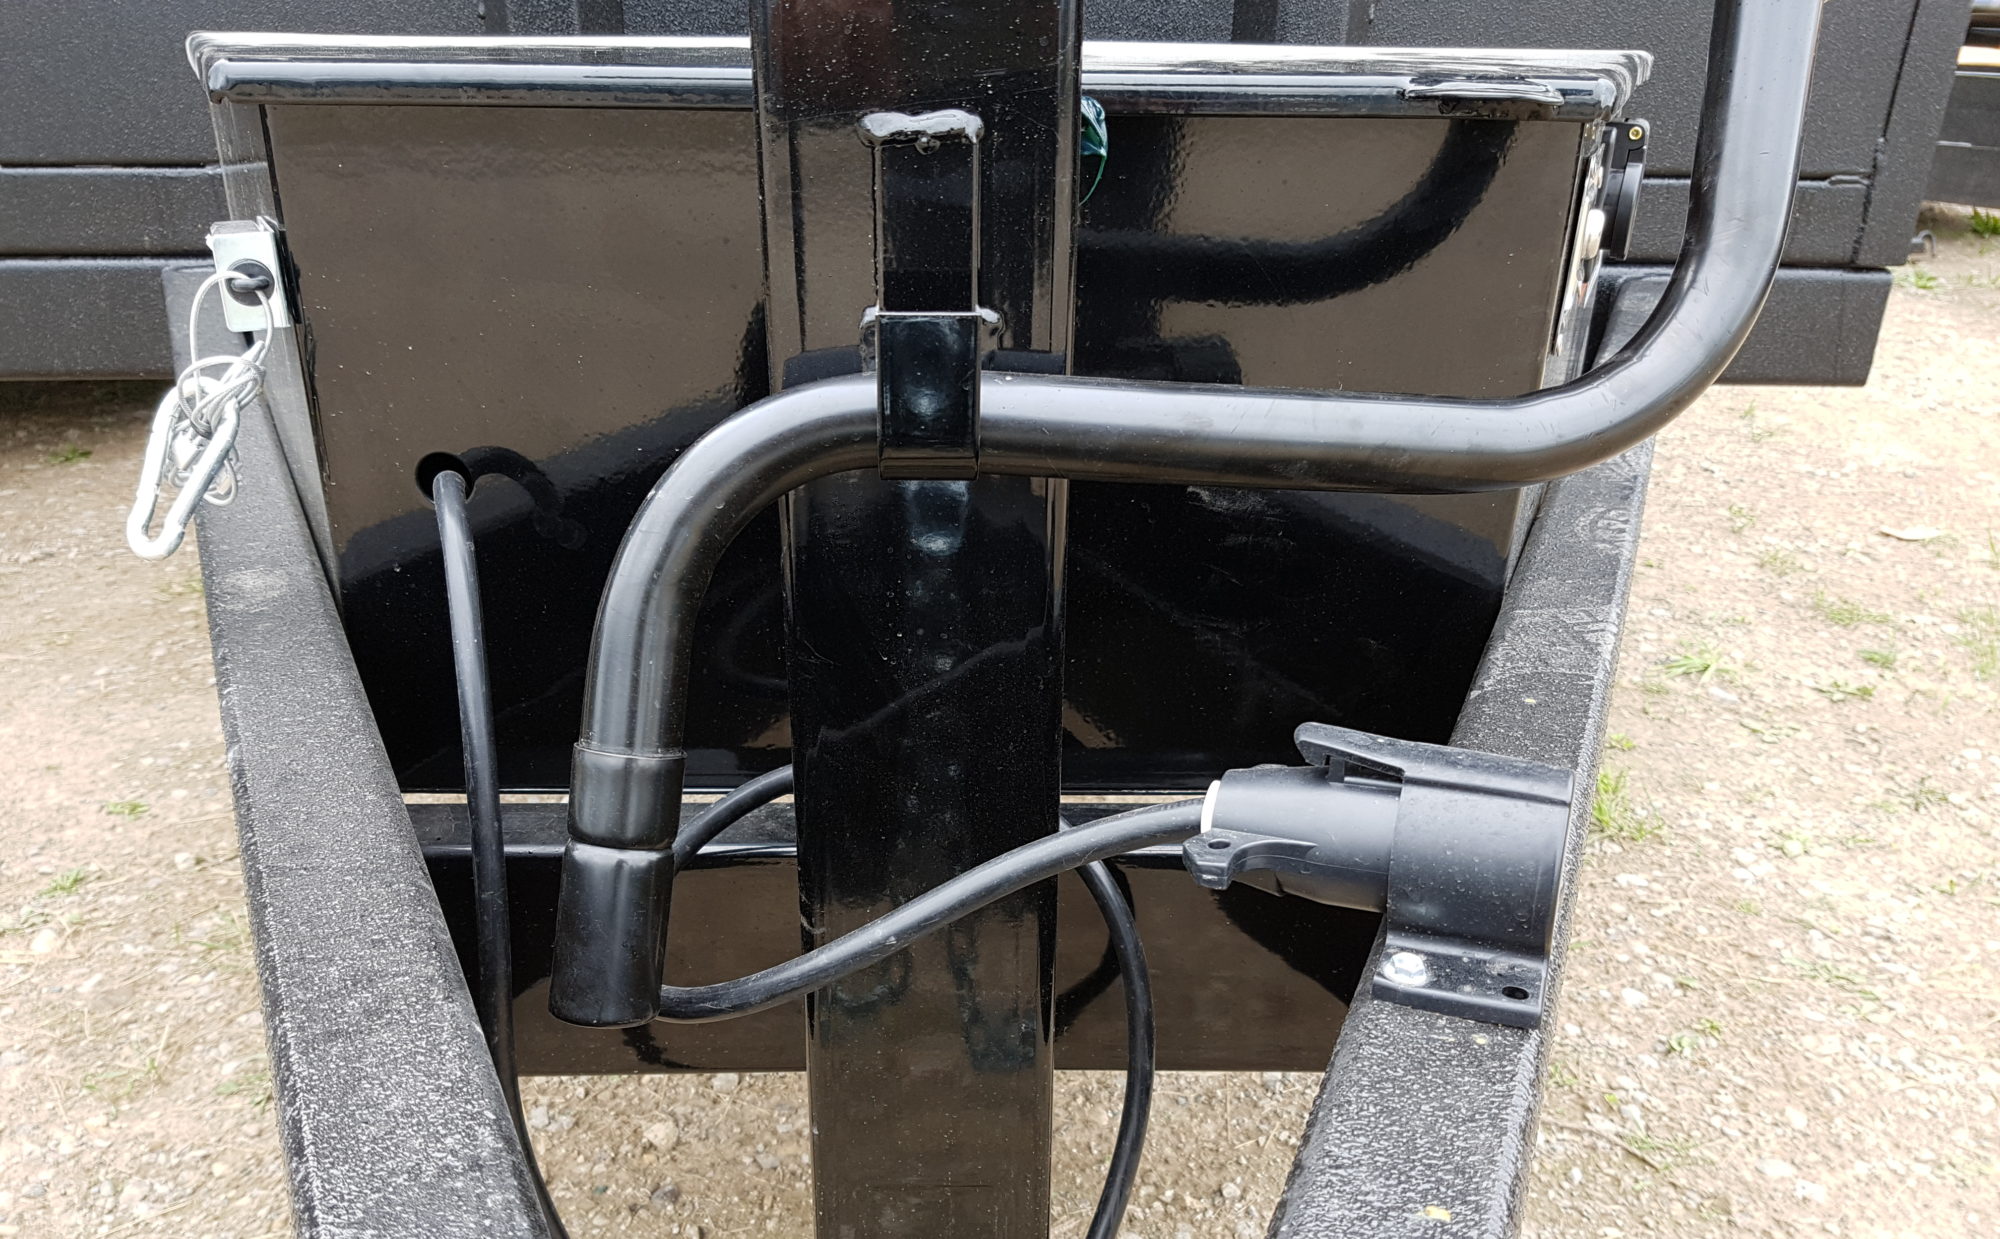 Connect-to-Protect 7 Way mounted to trailer frame, mounting, securing, and protecting the wire harness and plug